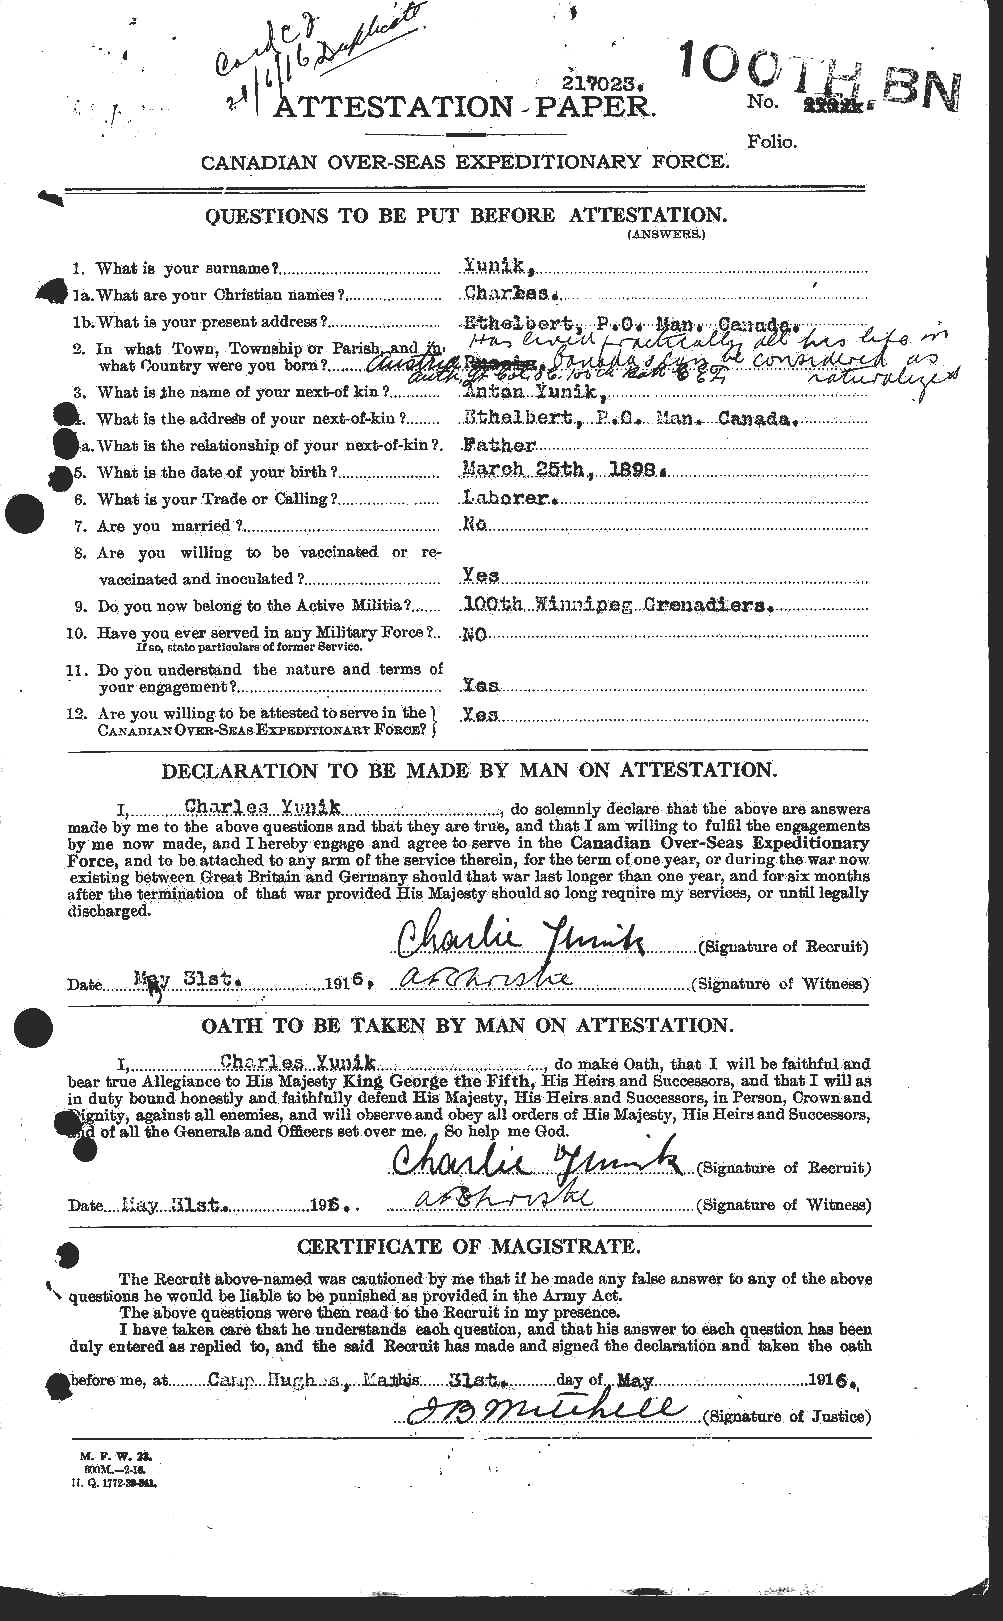 Personnel Records of the First World War - CEF 690396a